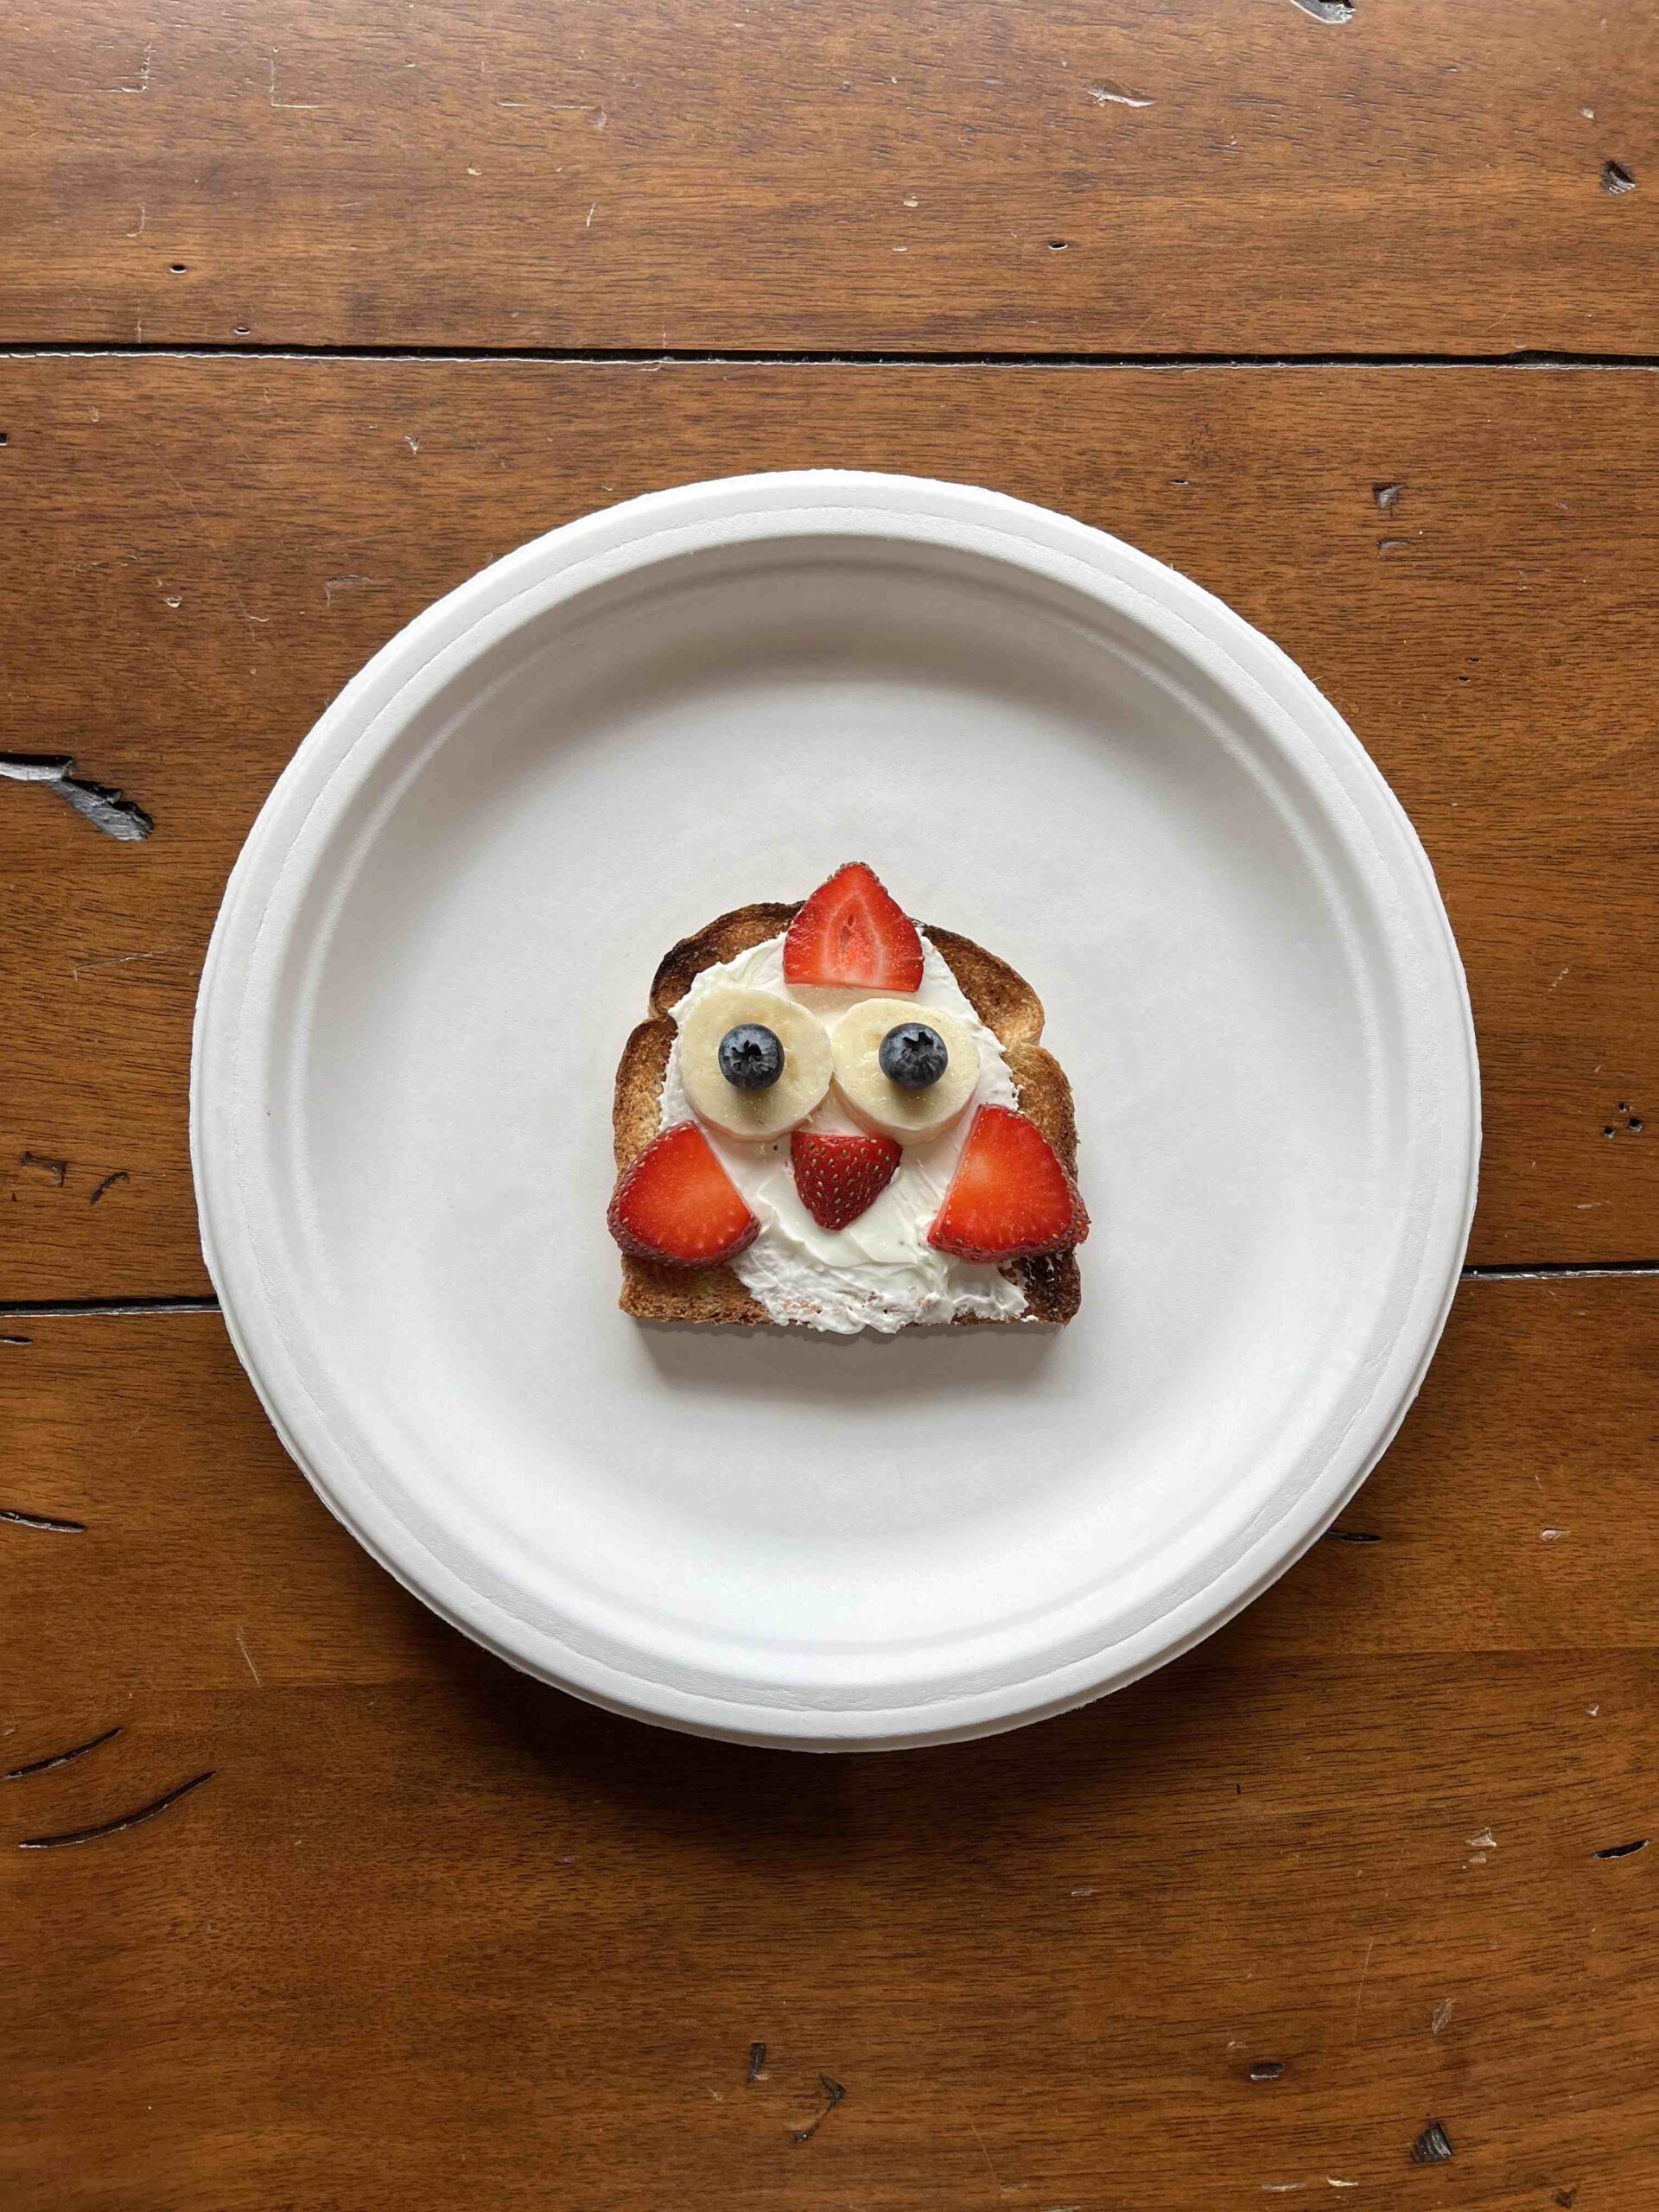 Owl toast made with cream cheese, bananas, strawberries and blue berries